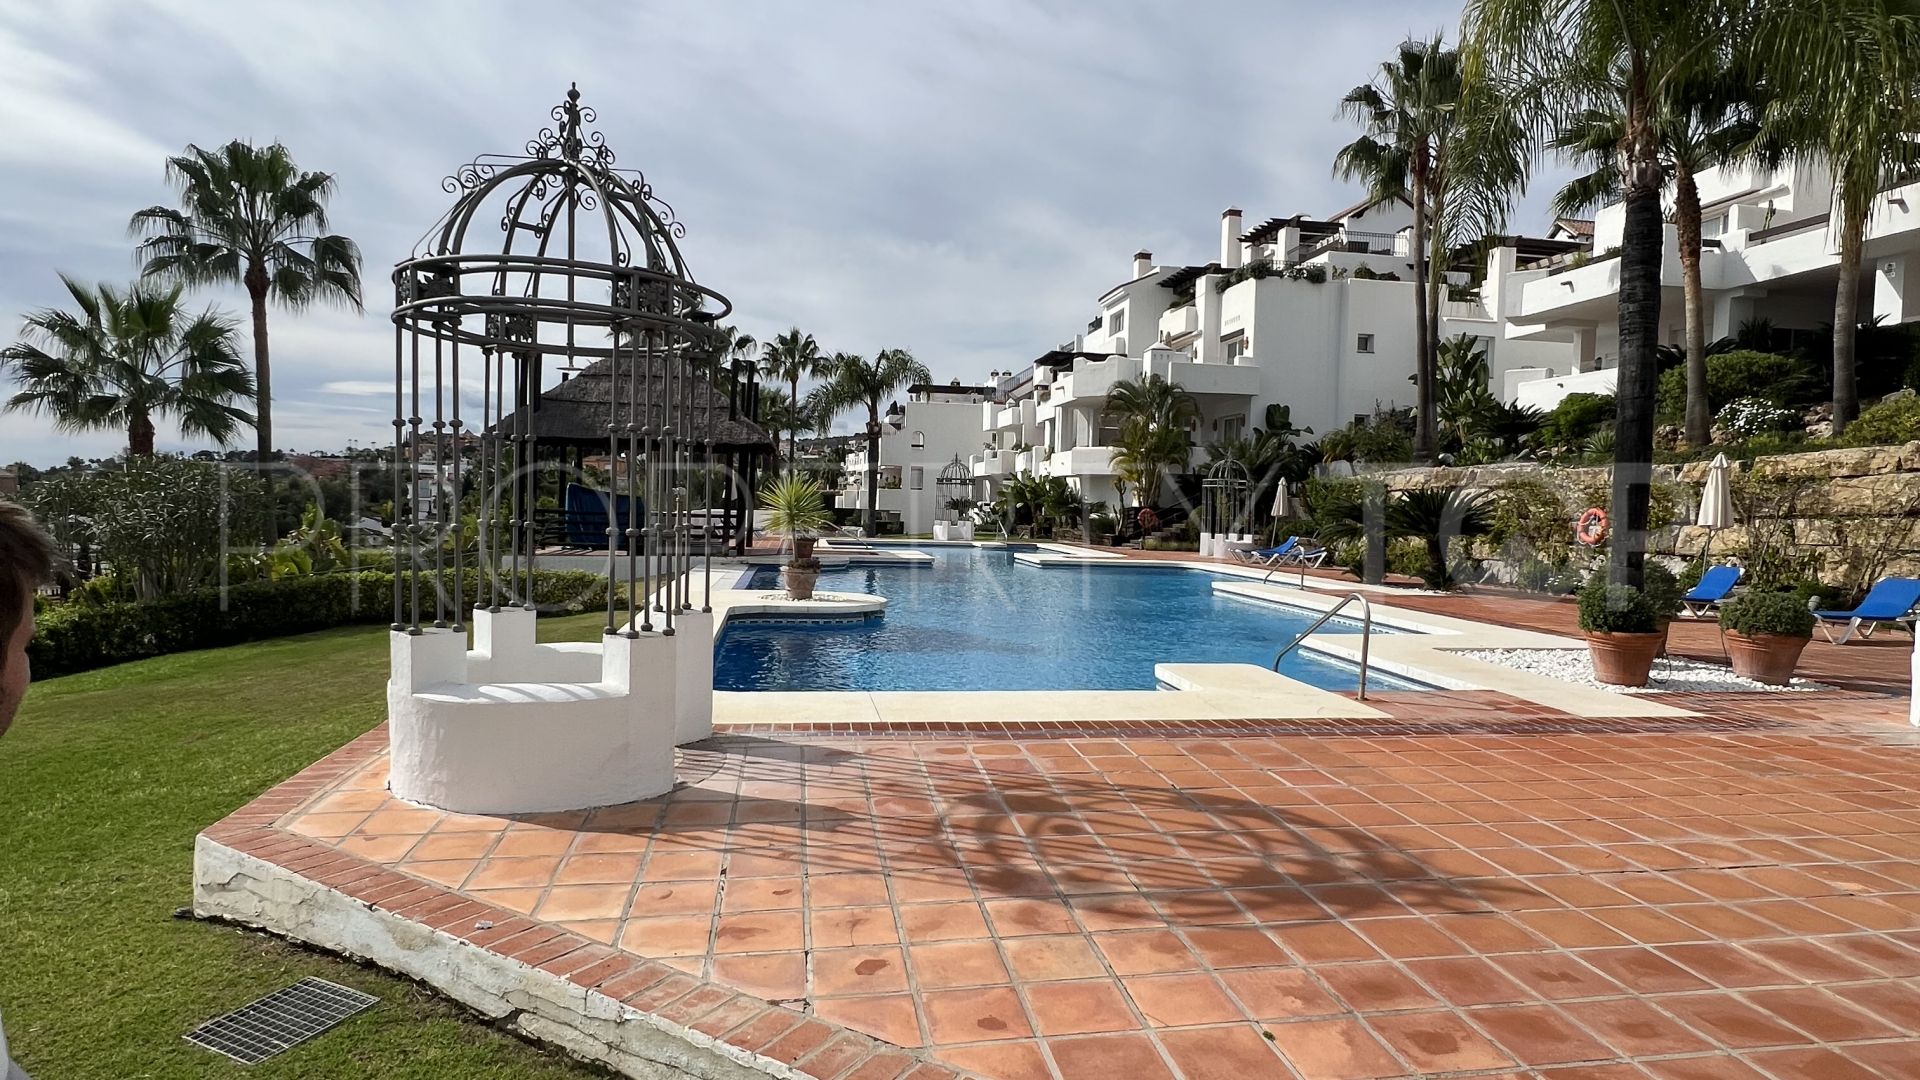 Ground floor apartment with 2 bedrooms for sale in Las Tortugas de Aloha